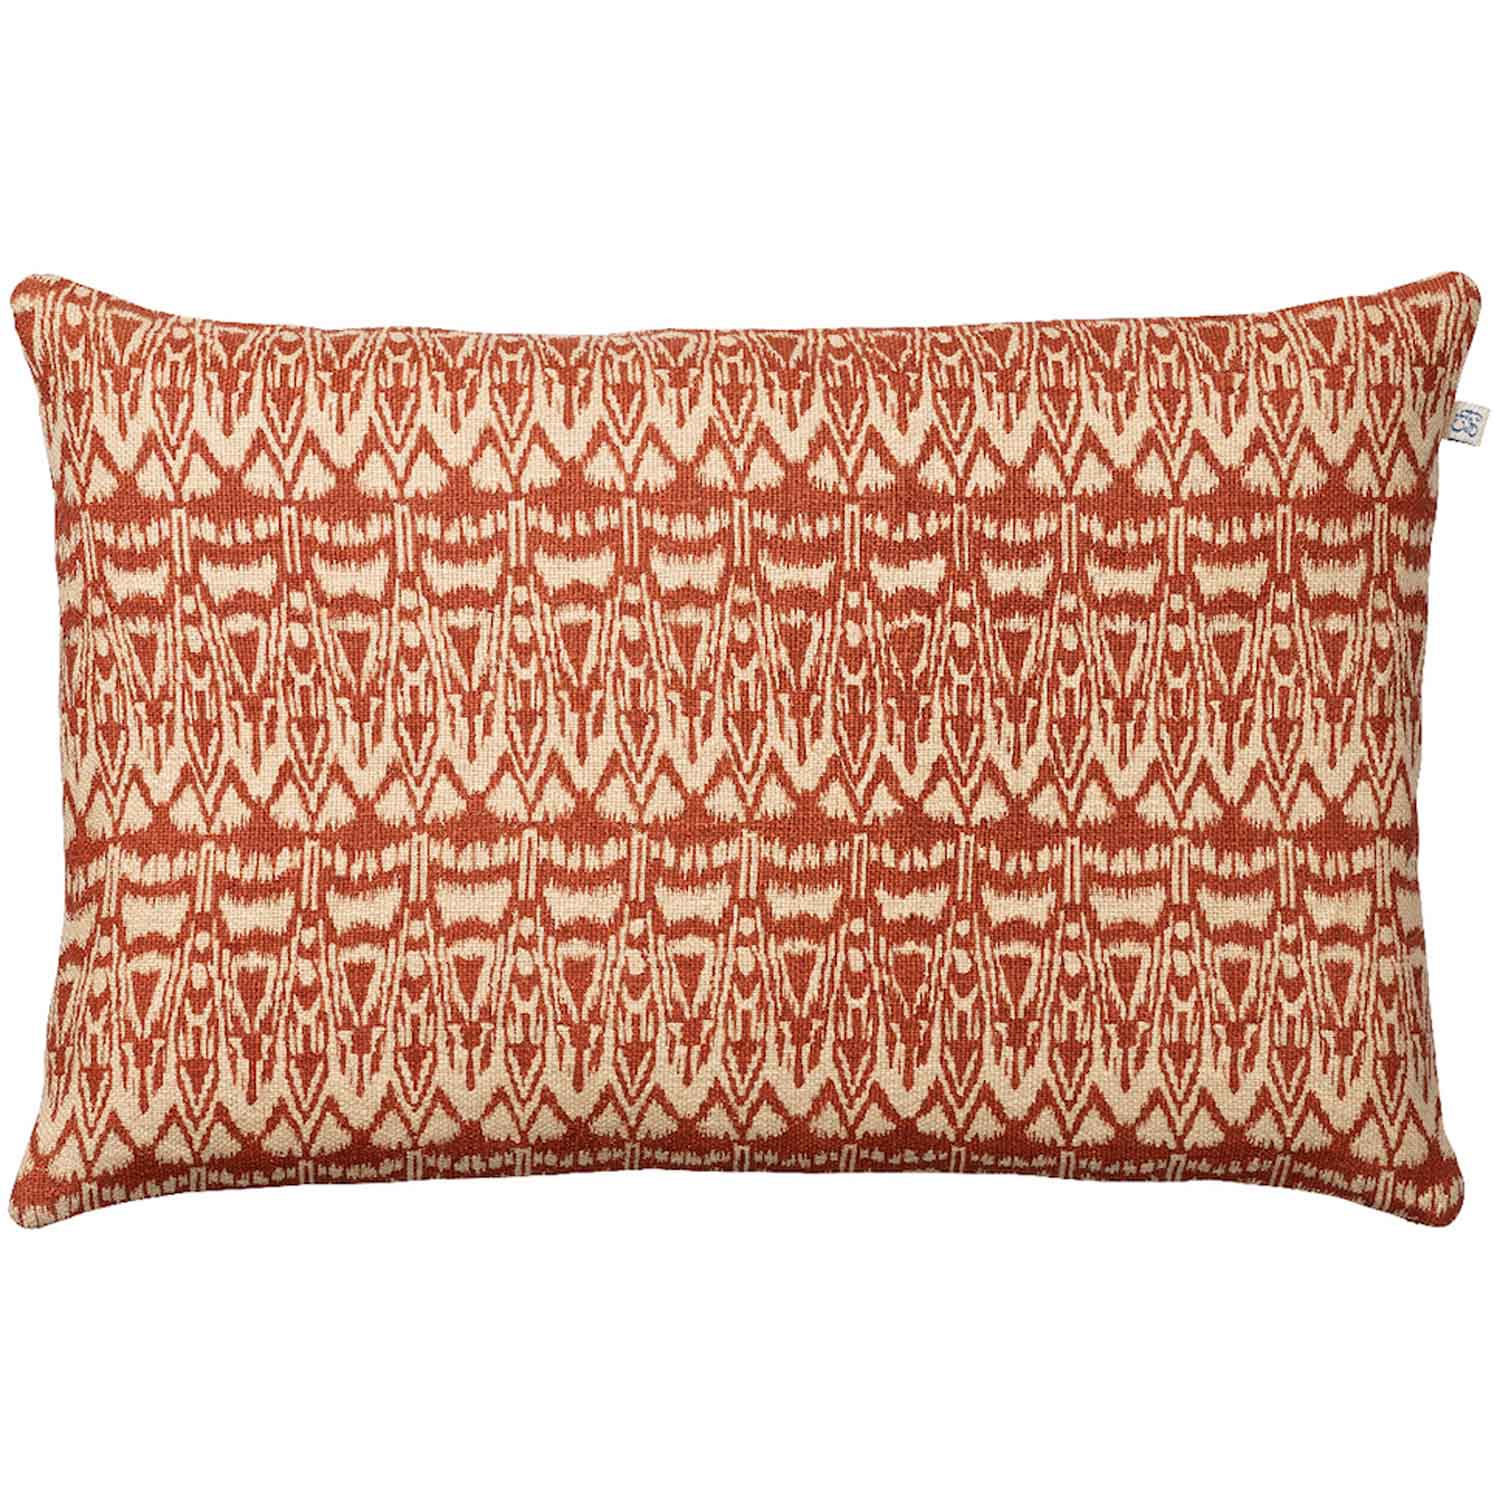 Double Sided- Blue IKAT cushion cover Decorative Pillow Cream and Brown 40 x 60 cm